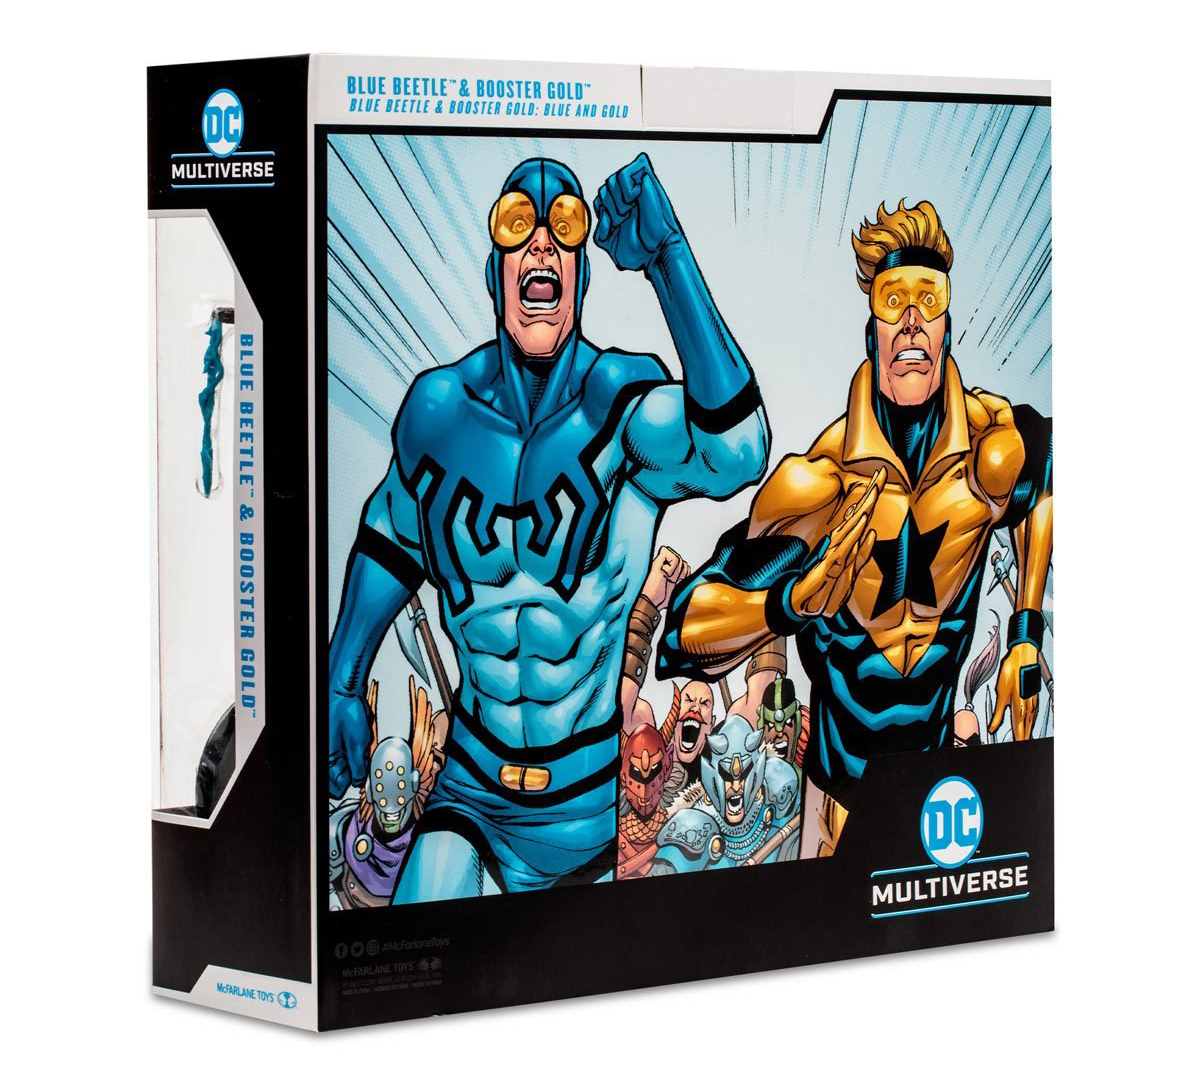 blue-beetle-booster-gold-dc-multiverse-action-figure-2-pack-packaging-box-art-3